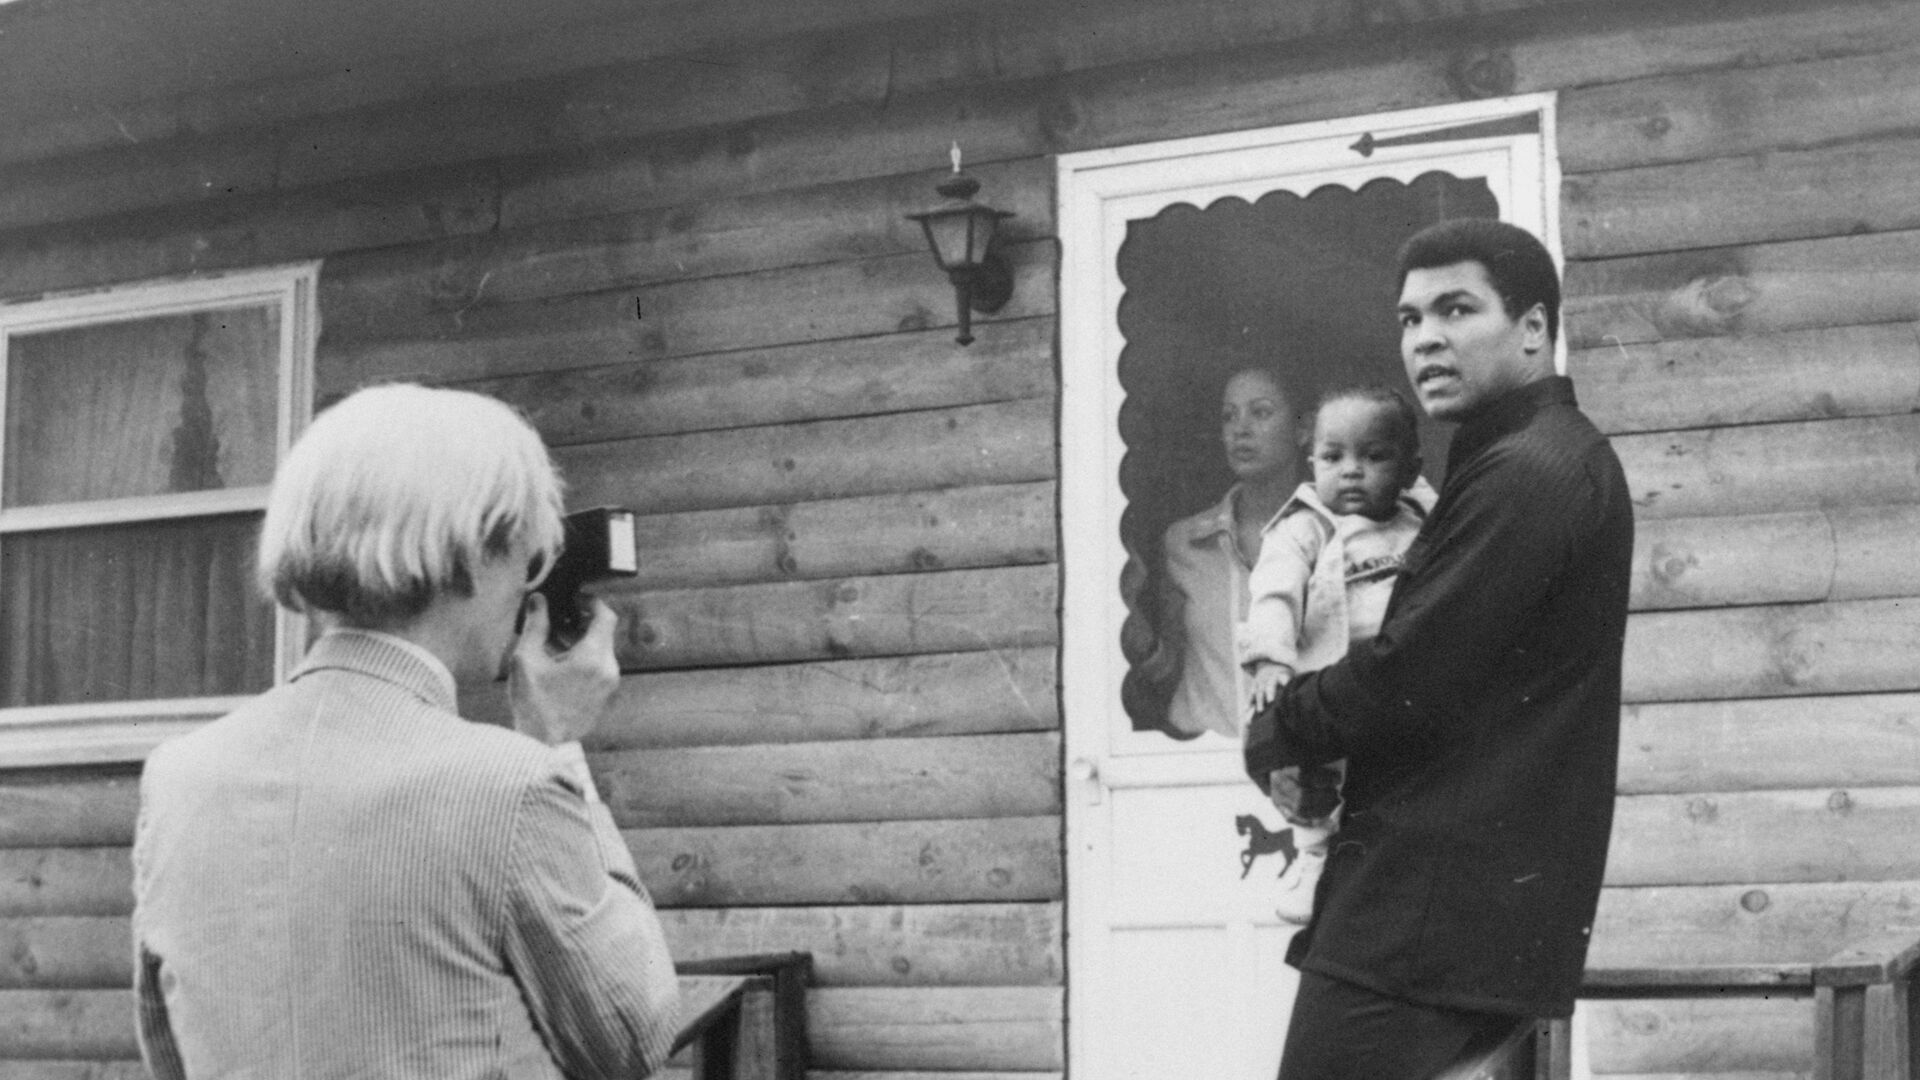 Pop artist Andy Warhol, left, is shown photographing Muhammad Ali, his infant daughter, Hanna, and wife, Veronica, Thursday, August 18, 1977, at Ali's training camp in Deer Lake, Pa. - اسپوتنیک افغانستان  , 1920, 03.06.2022